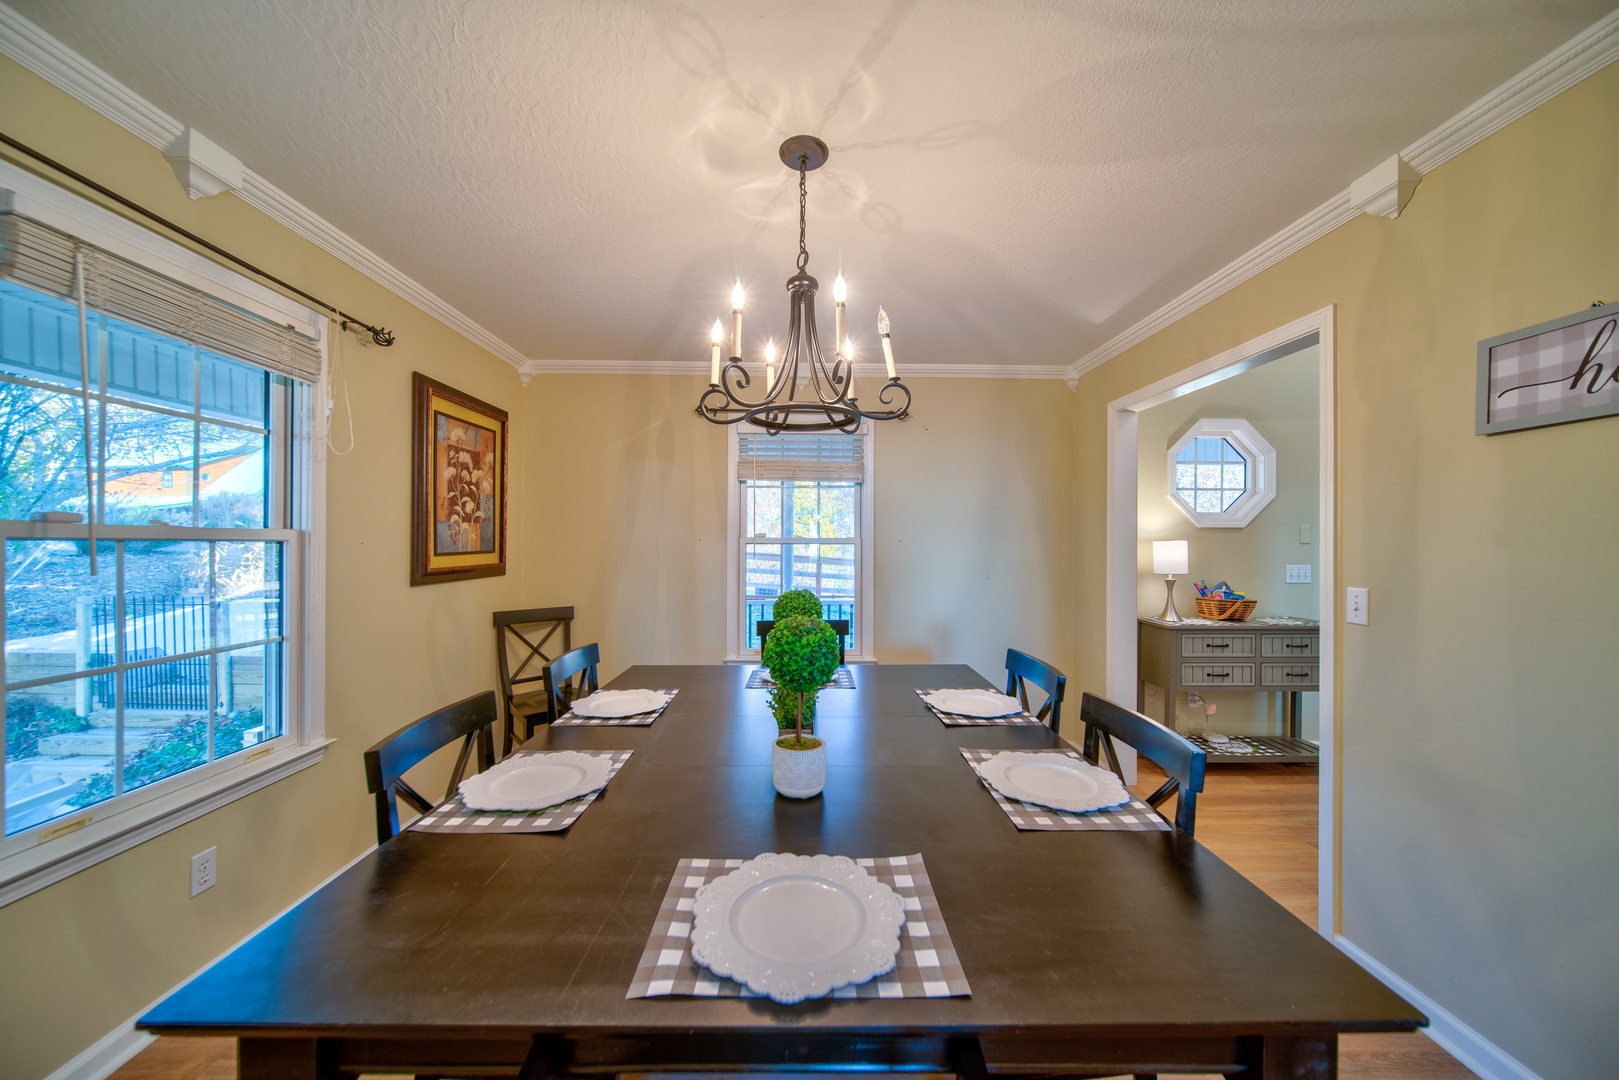 Gather for elegant meals together at the dining table, with seating for 6